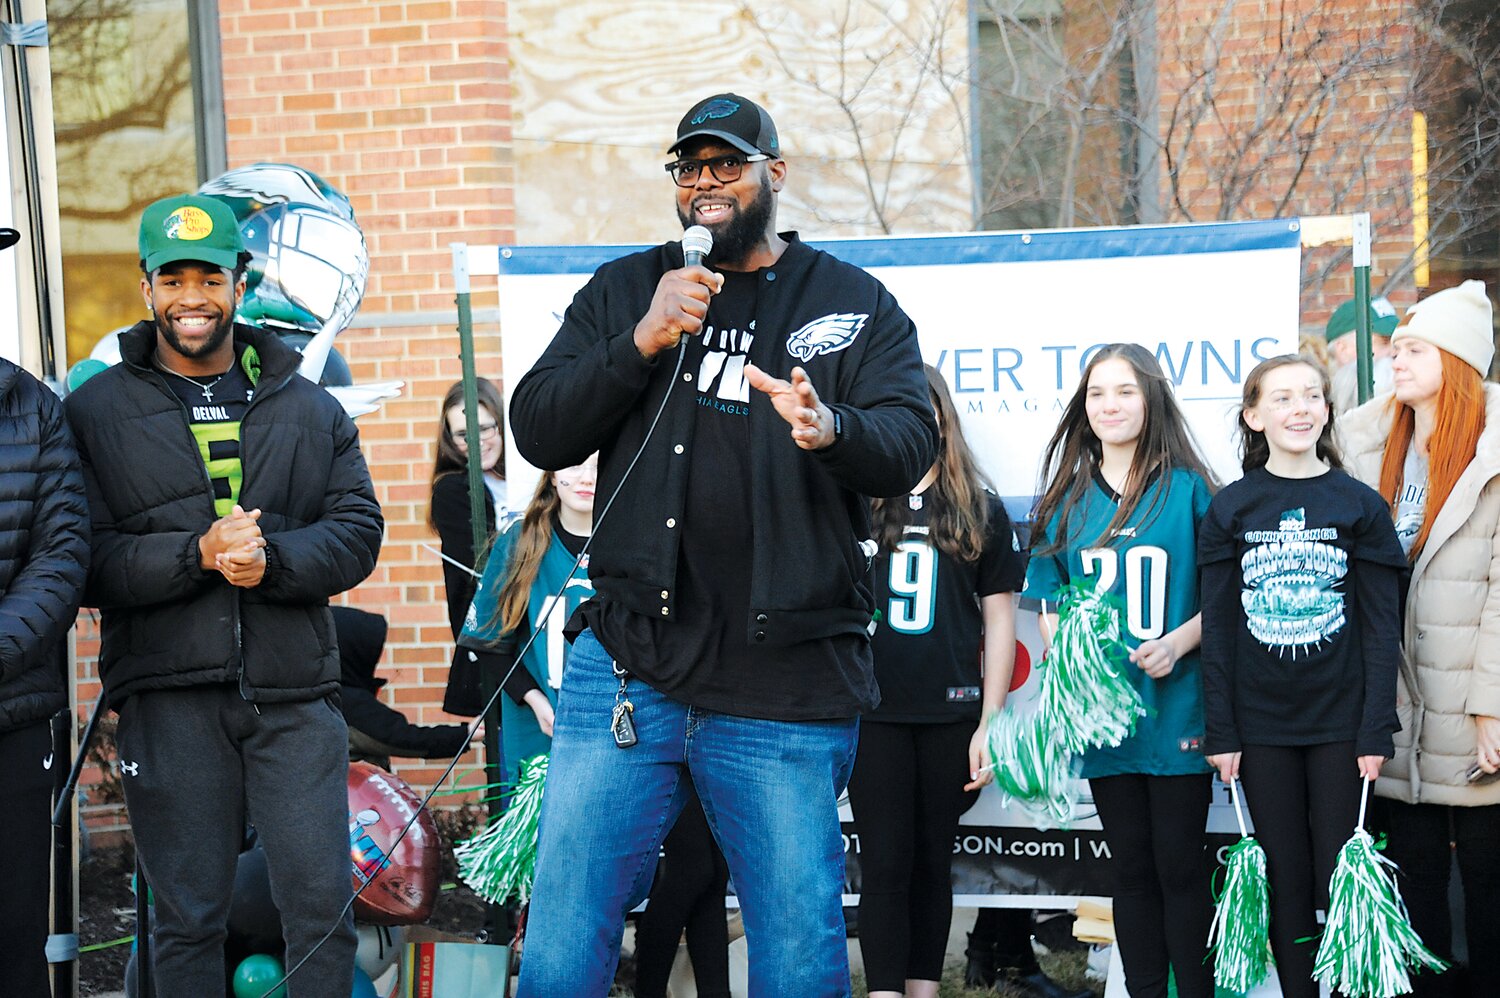 Former Eagles Pro Bowl offensive tackle Tra Thomas, who played 11 seasons and made three Pro Bowls in Philadelphia, fires up the crowd at the Herald’s “Bucks County Loves the Birds” pep rally on the lawn of the old county courthouse in Doylestown. The rally was held Friday, Feb. 10, ahead of Super Browl LVII, which the Chiefs won 38-35.